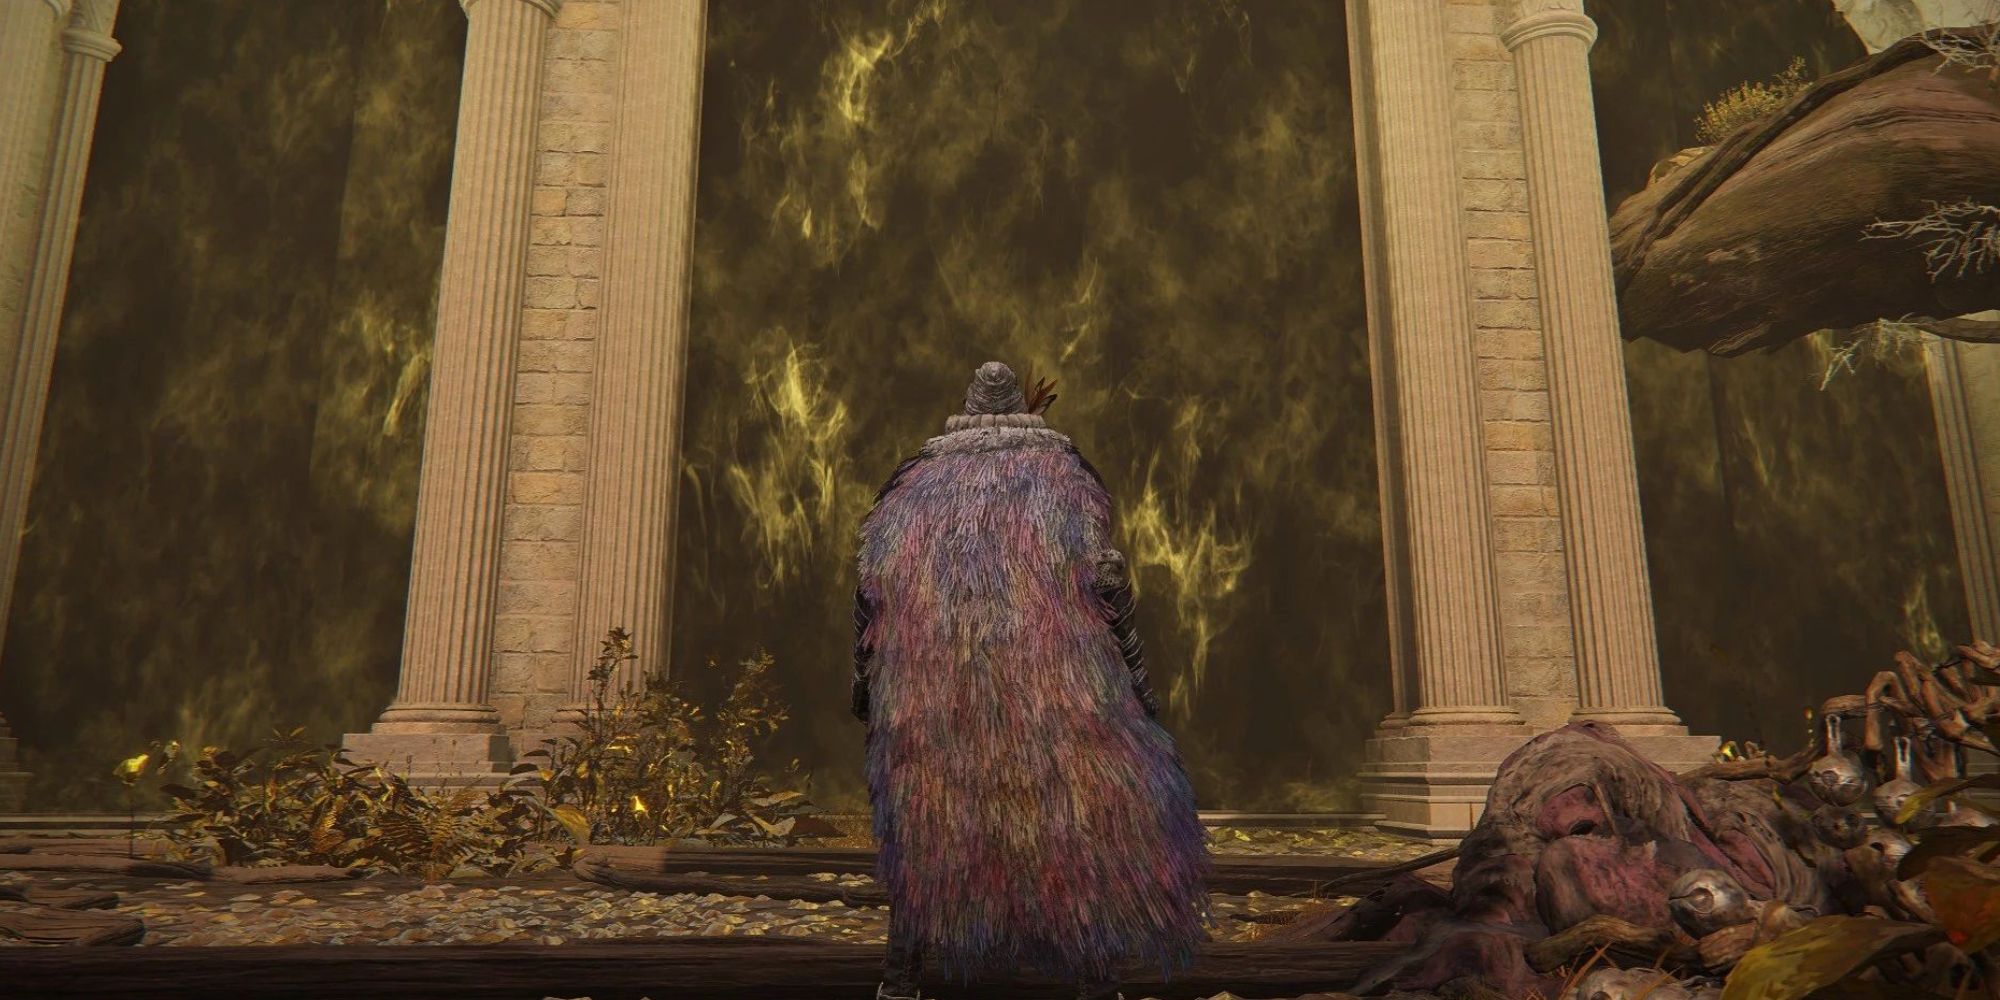 A man stands in front of the fog gate, which reaches up into the sky boarded by pillars